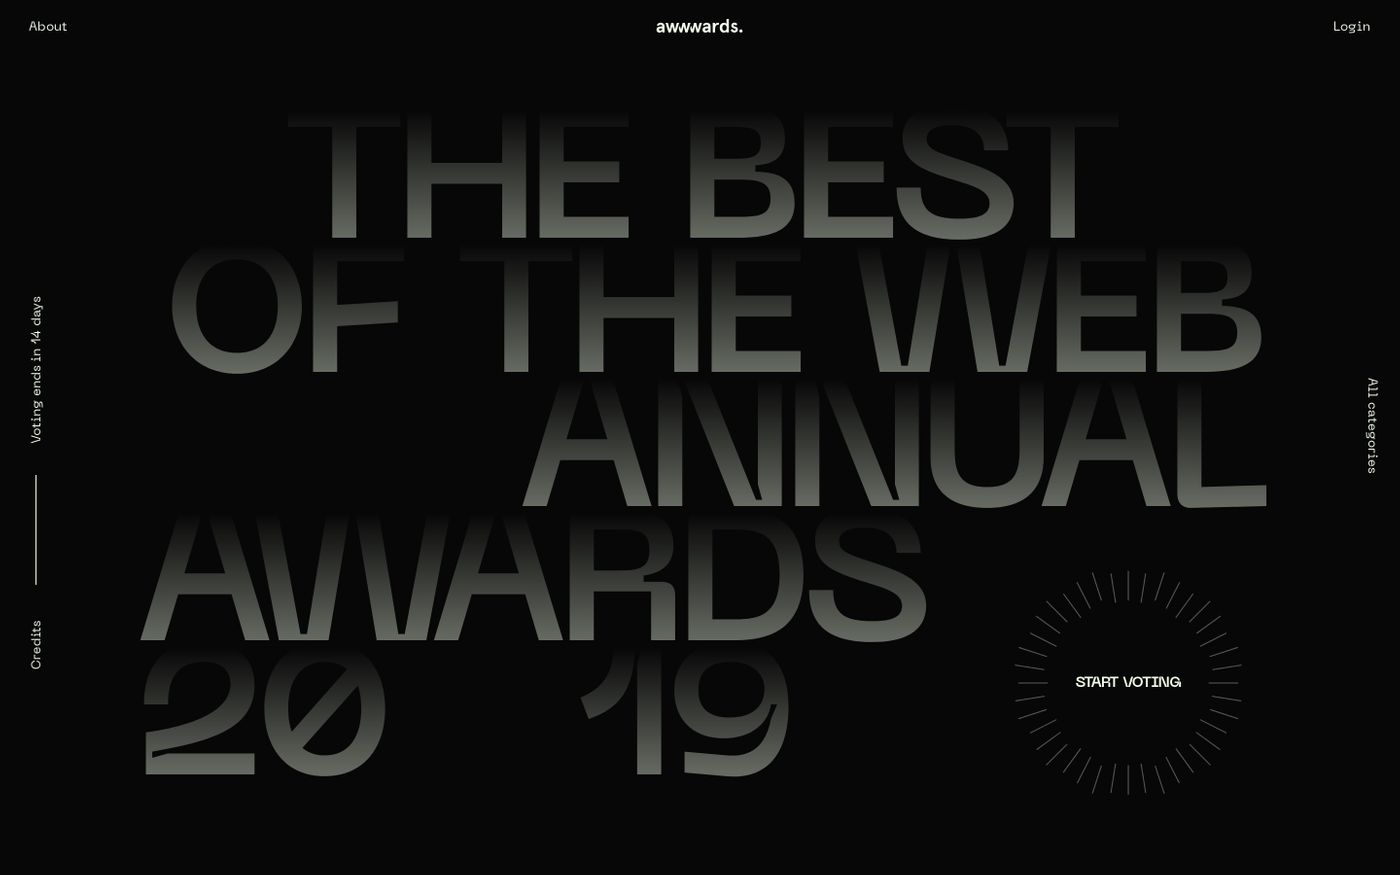 Screenshot of Awwwards nominees of the Year 2019 website